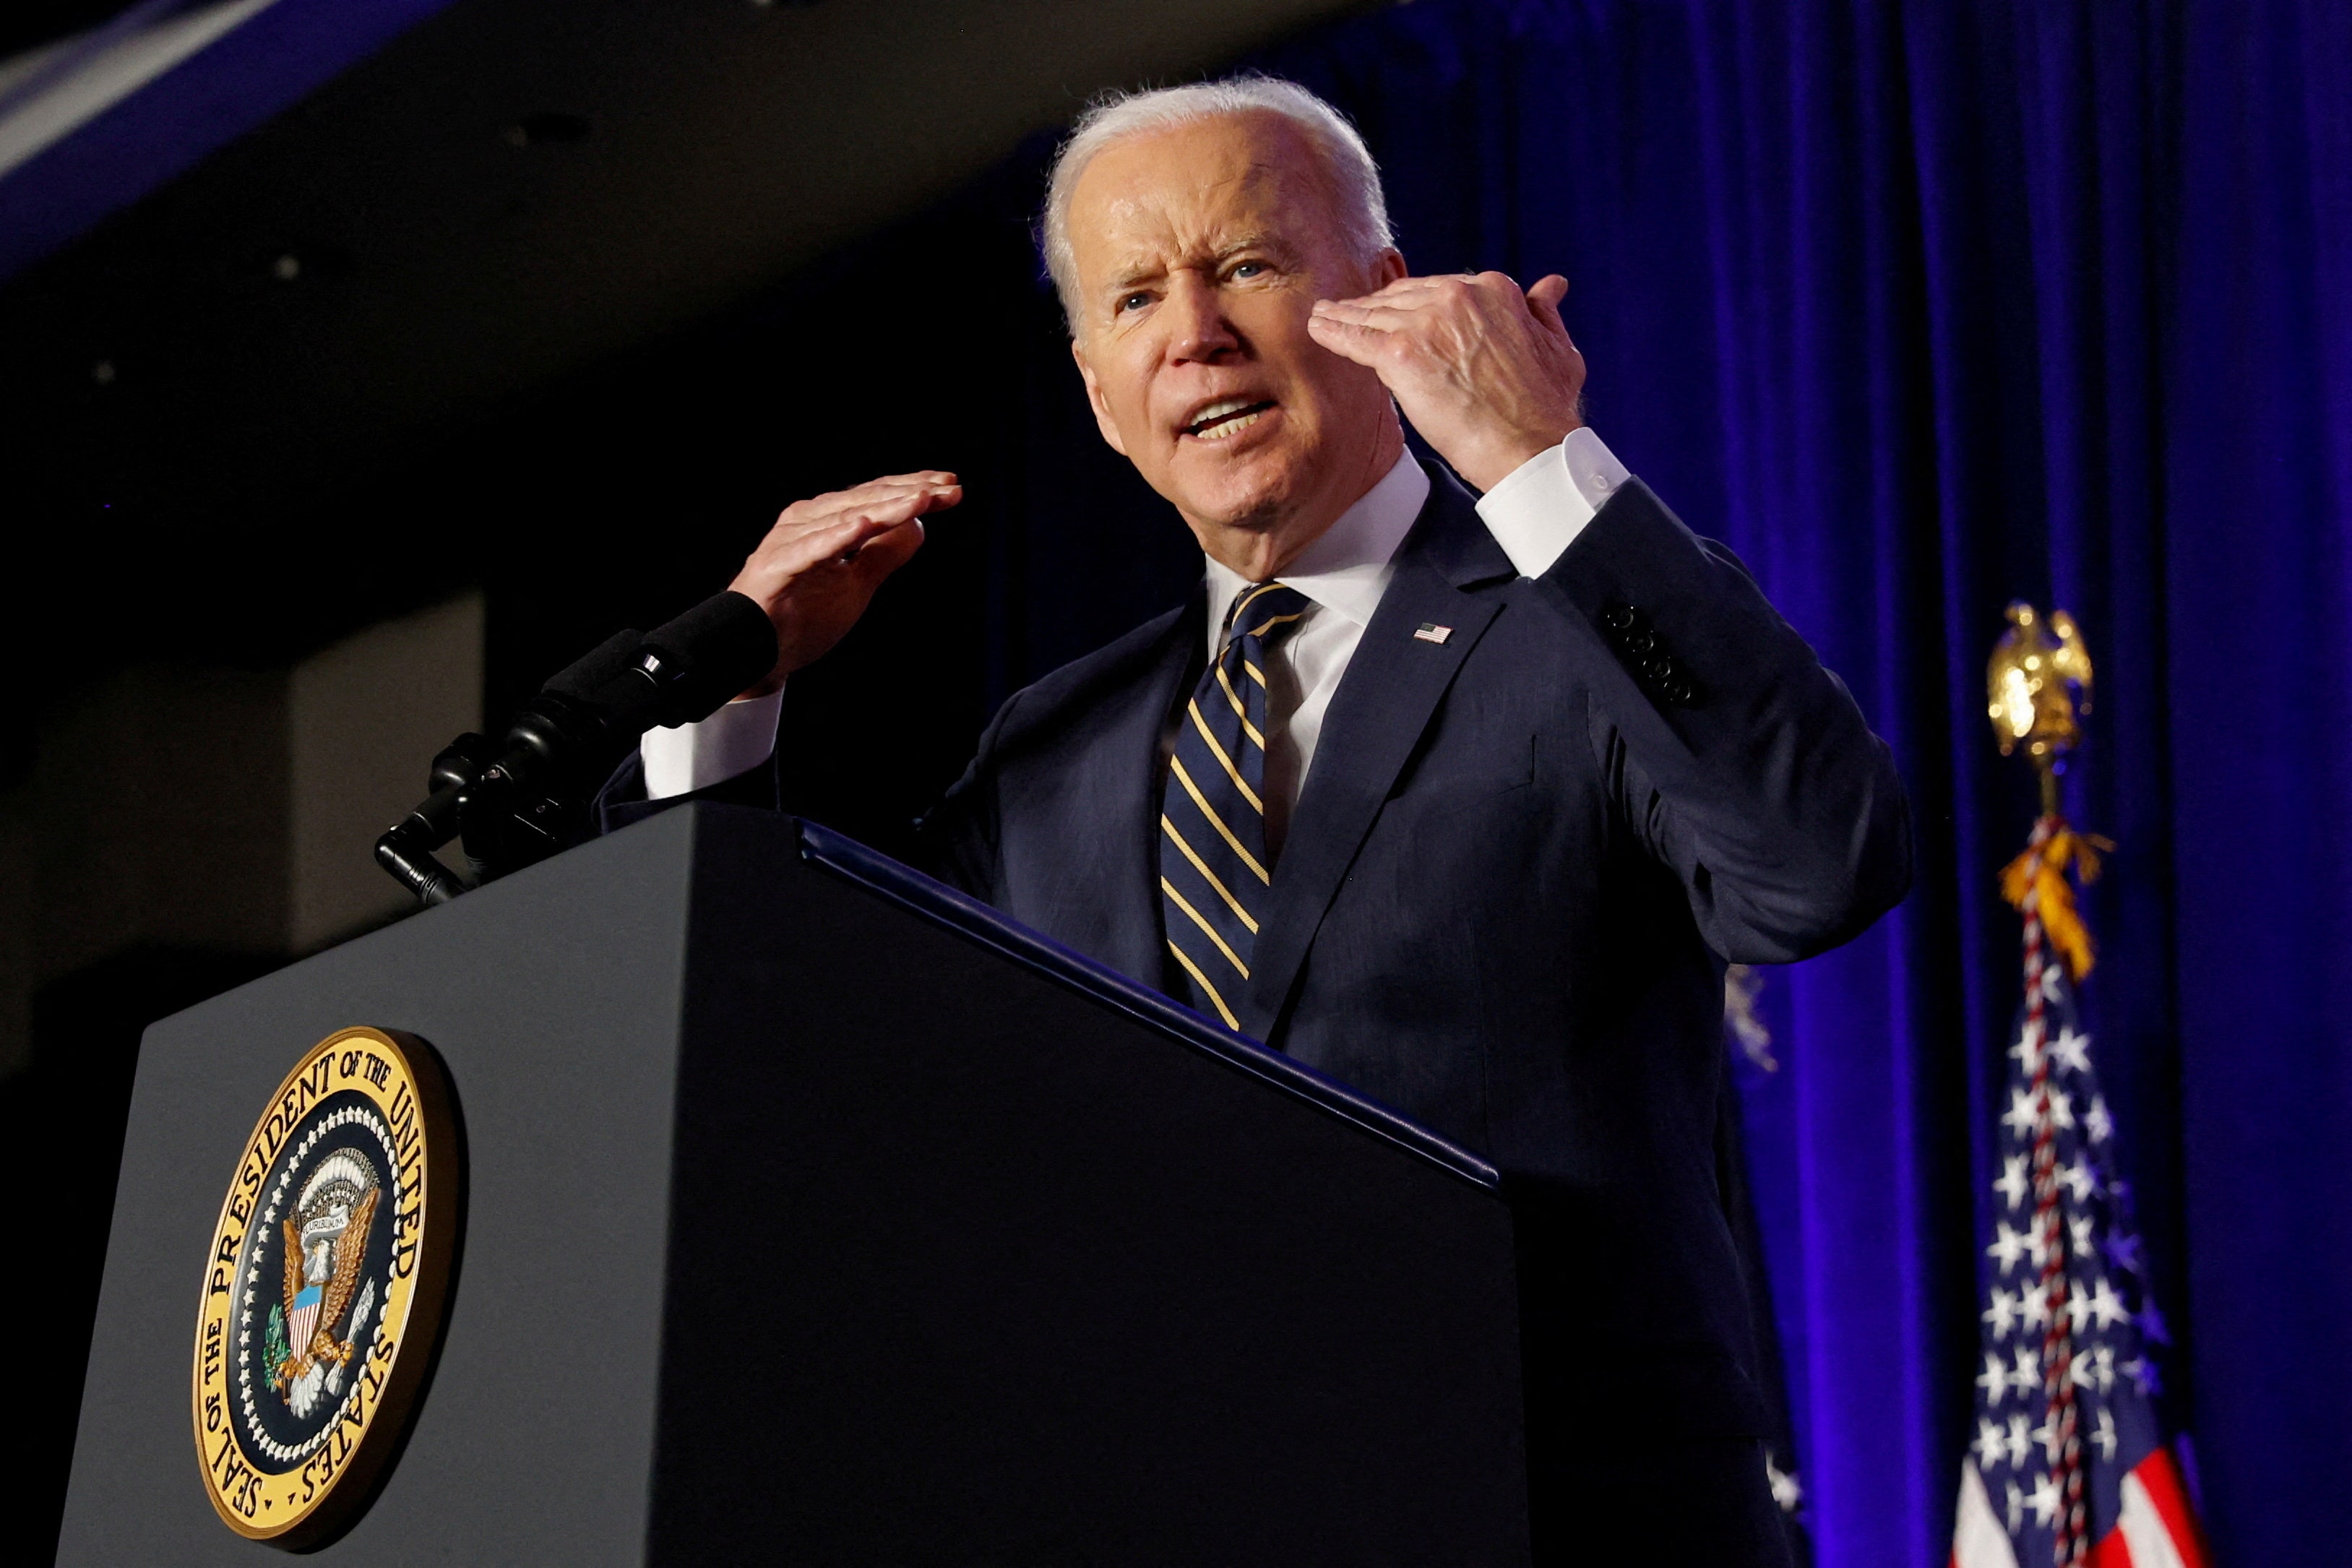 Gas prices: Biden relies on NYT fact check, WaPo op-ed to deflect GOP criticism of energy policy